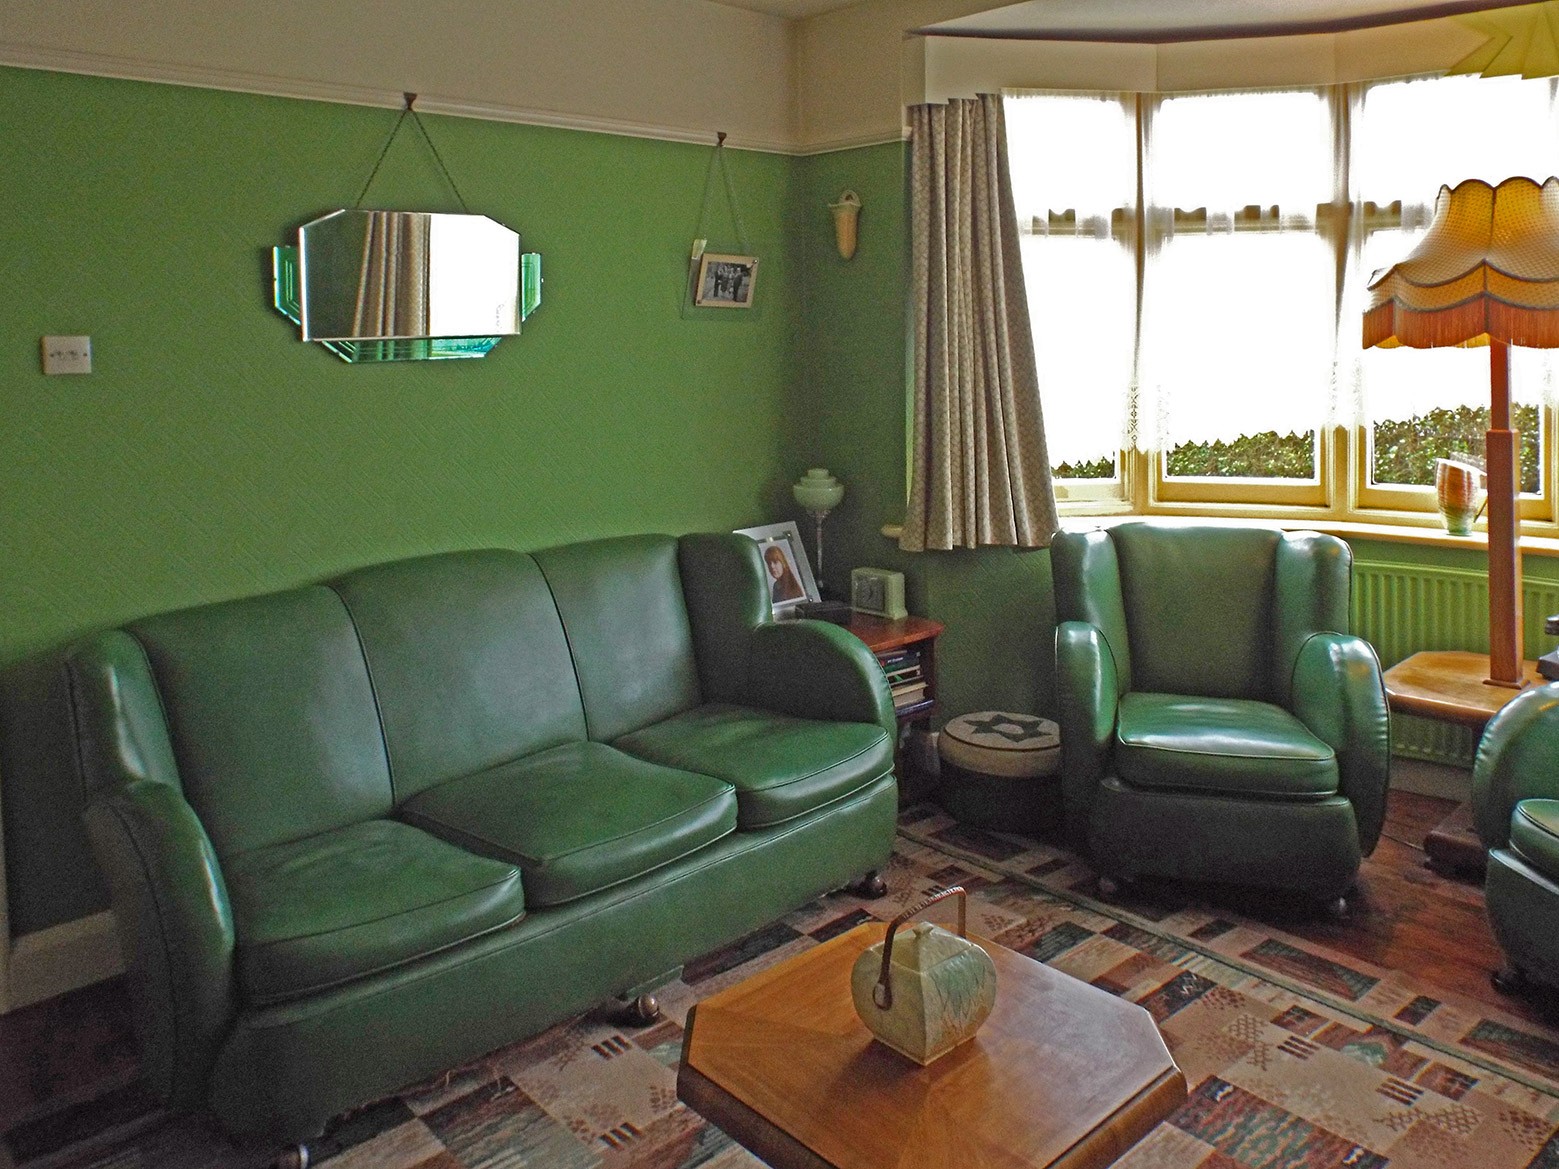 The living room at Retro House, a step back in time